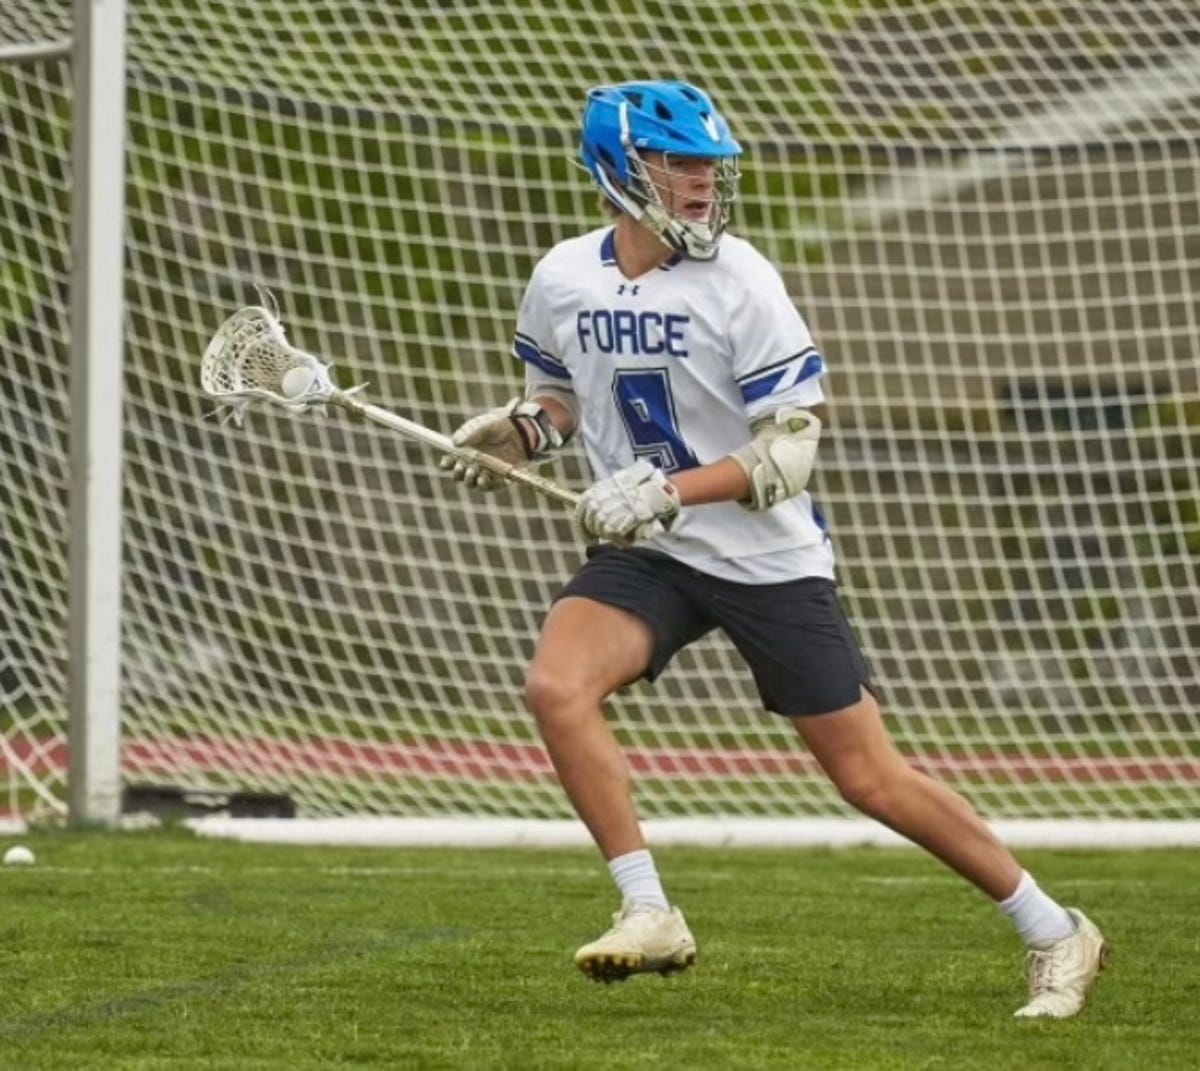 Charter of Wilmington boys lacrosse standout wins Delaware Online Athlete of the Week vote